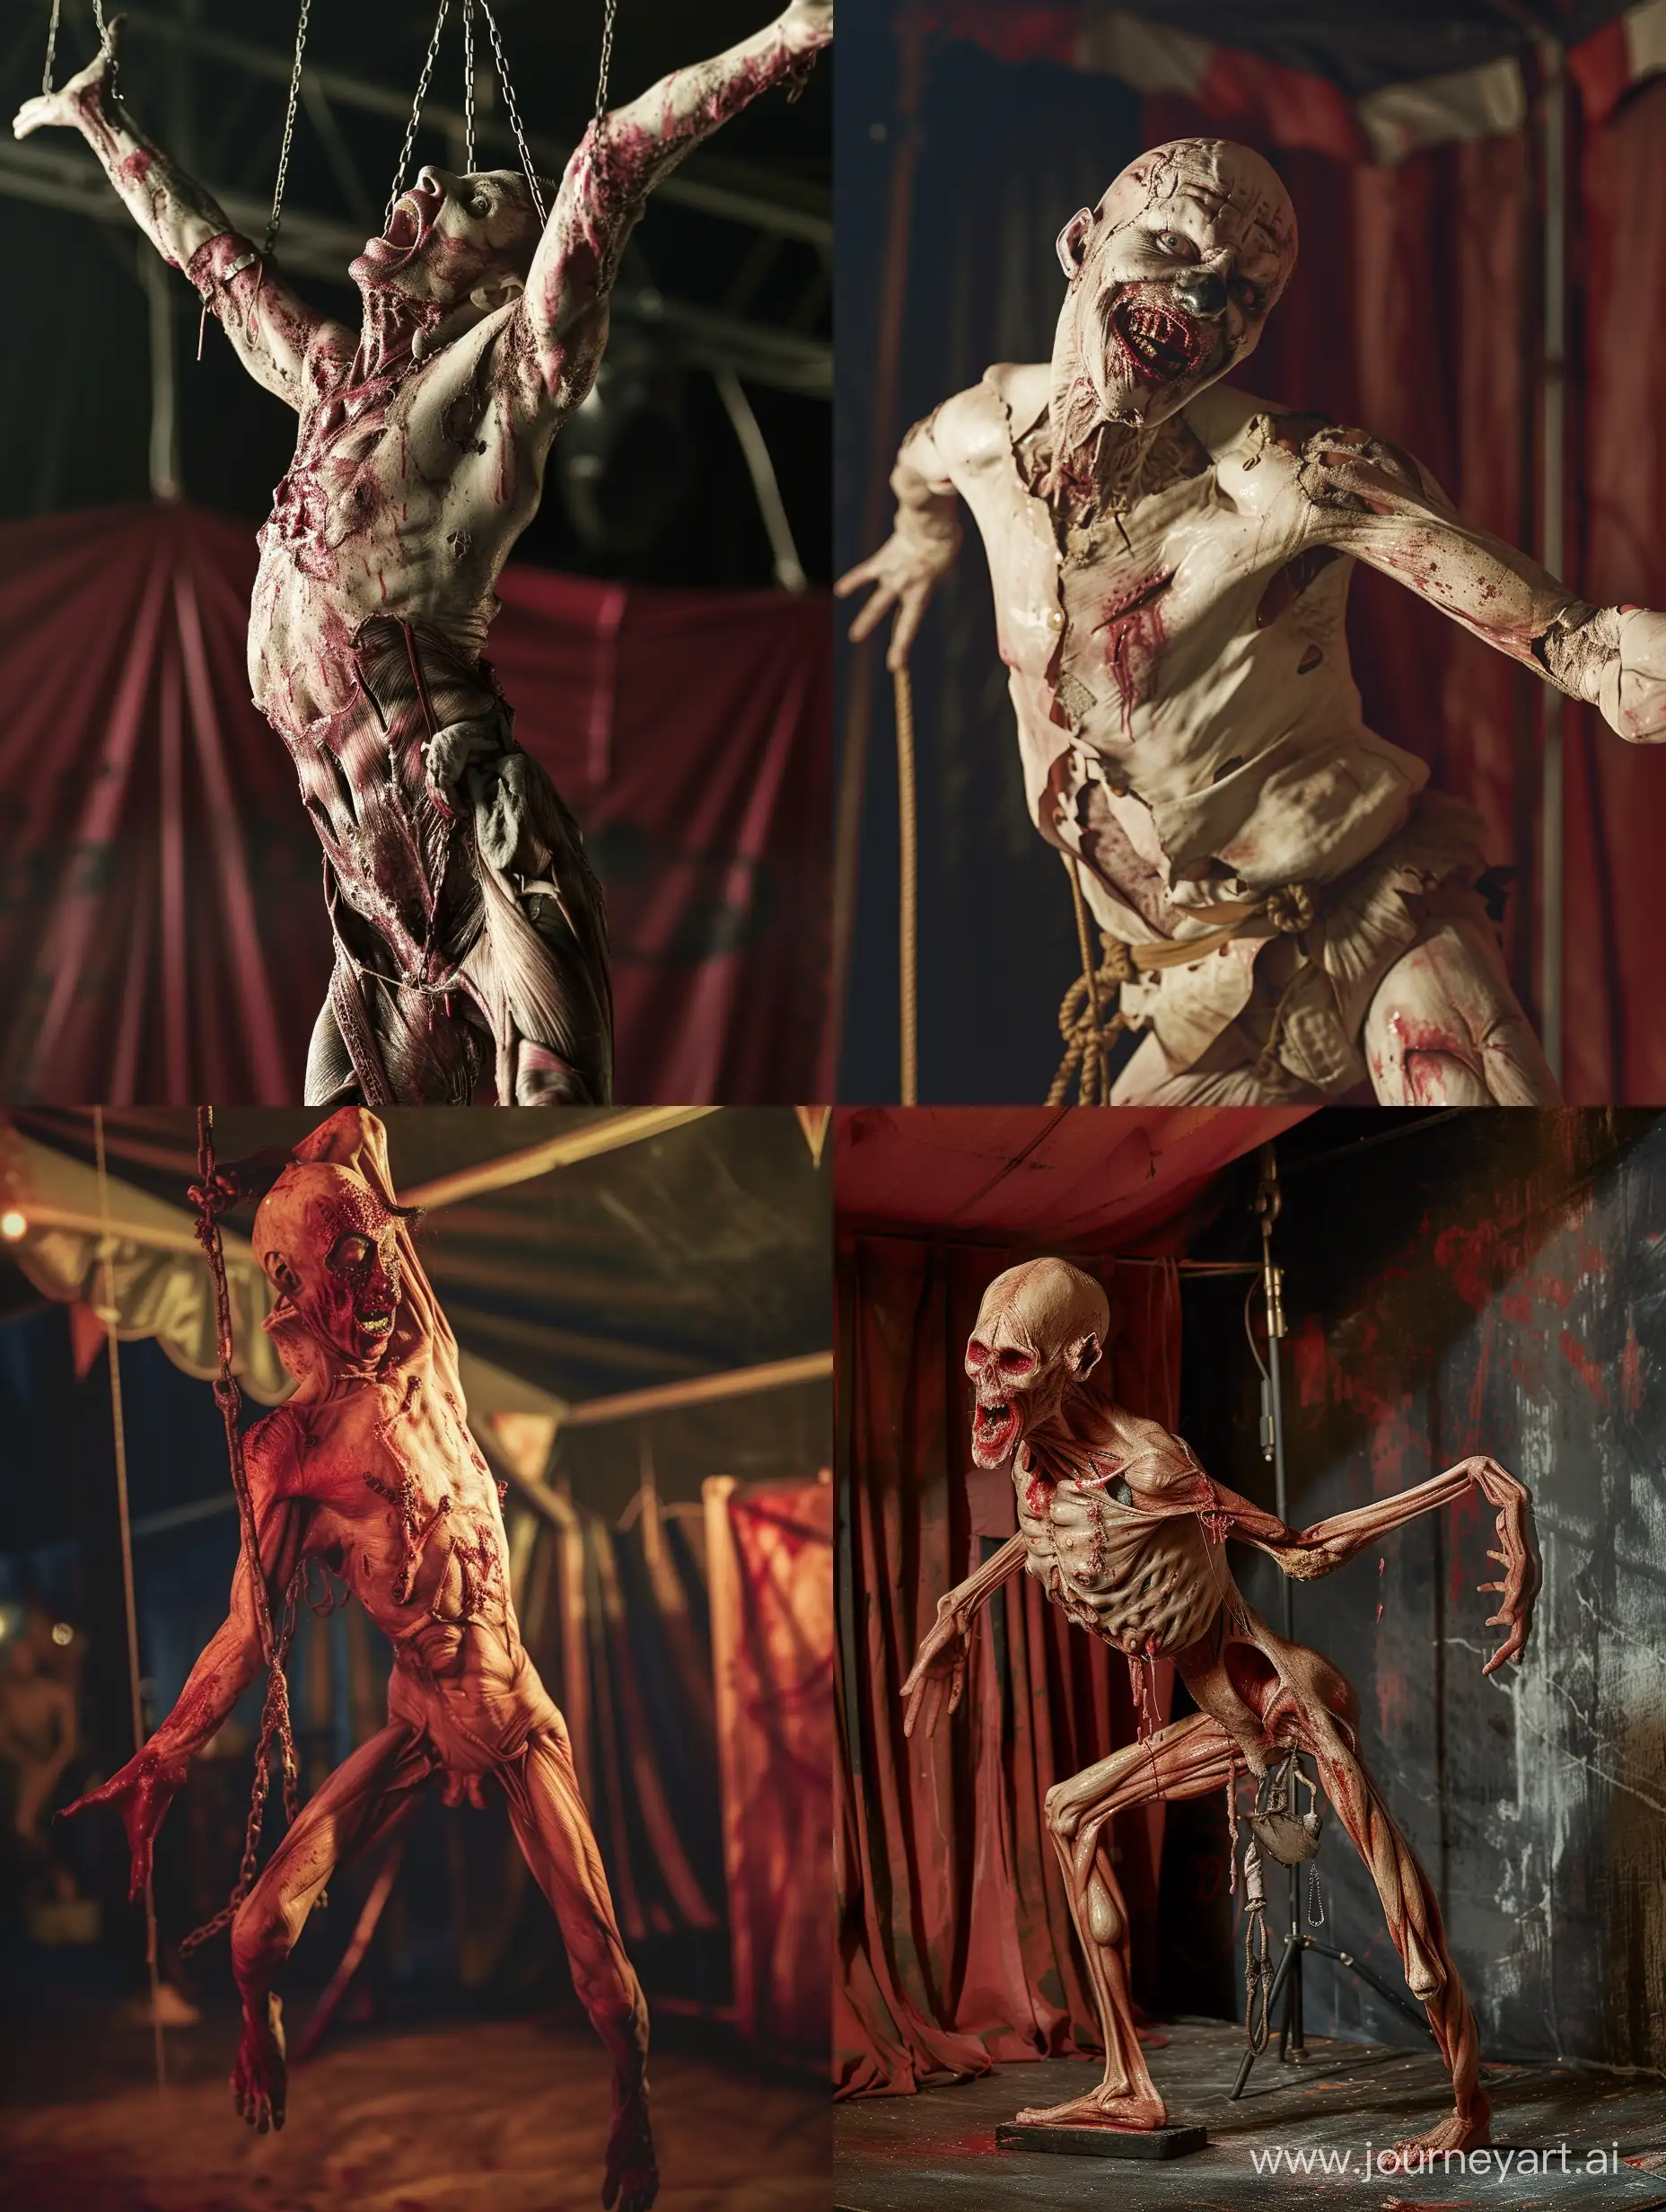 The Body Horror Circus: A sadistic carnival where grotesque performers showcase their deformed bodies, shocking and horrifying the audience with their twisted physicality. Derpy, comic relief, morbid core taken on Provia